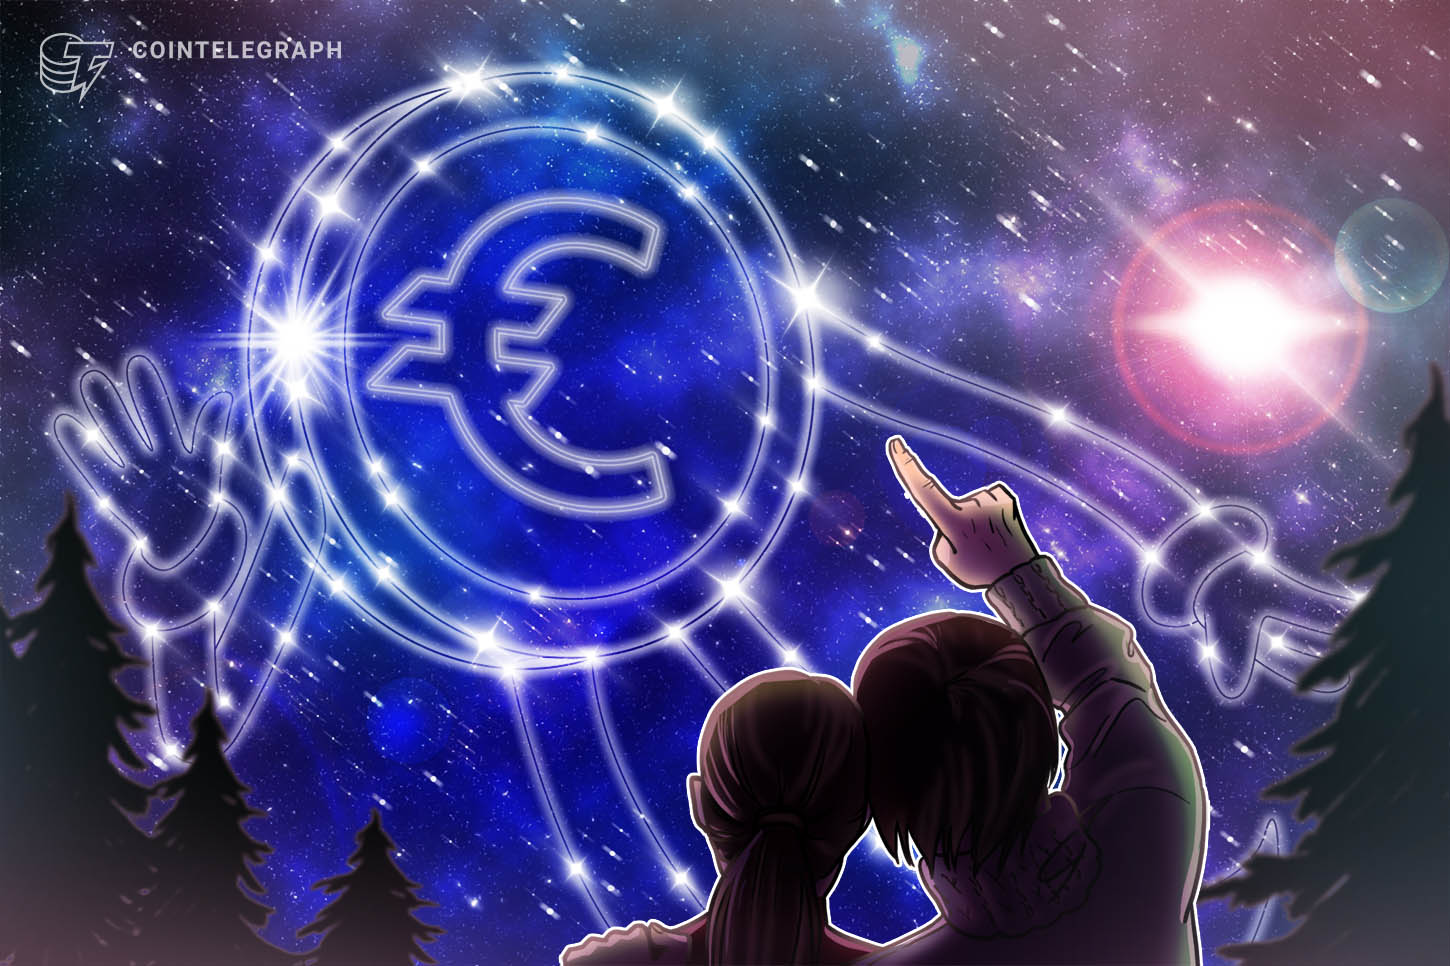 Euro stablecoin launched on Stellar by one among Europe’s oldest banks